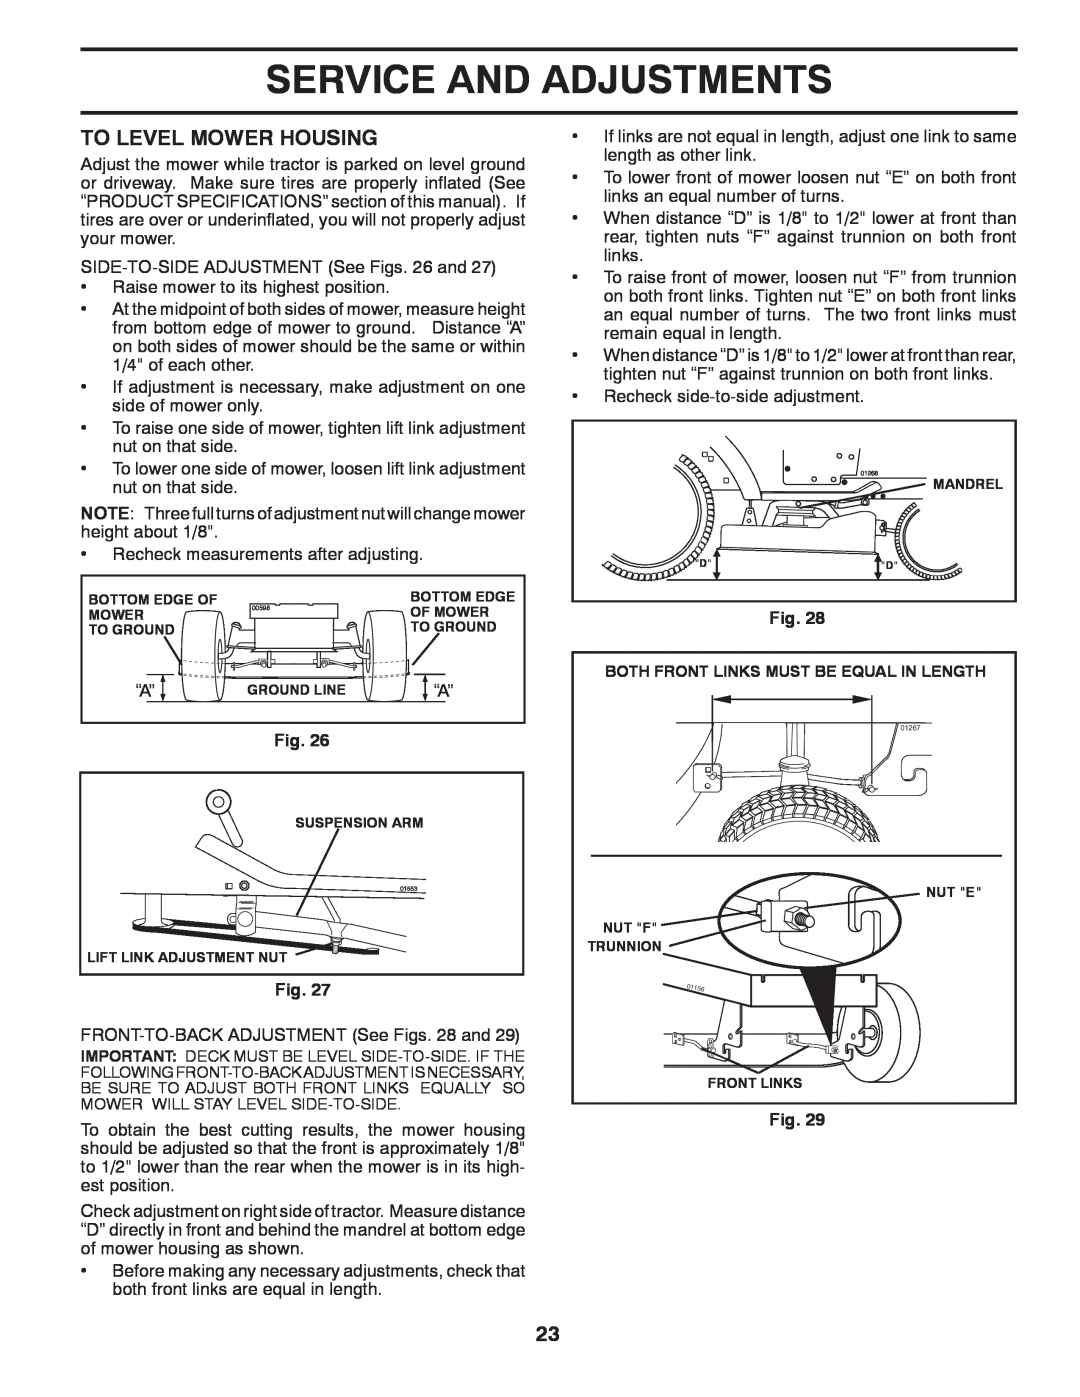 Jonsered LT2220 CMA2 manual To Level Mower Housing, Service And Adjustments 